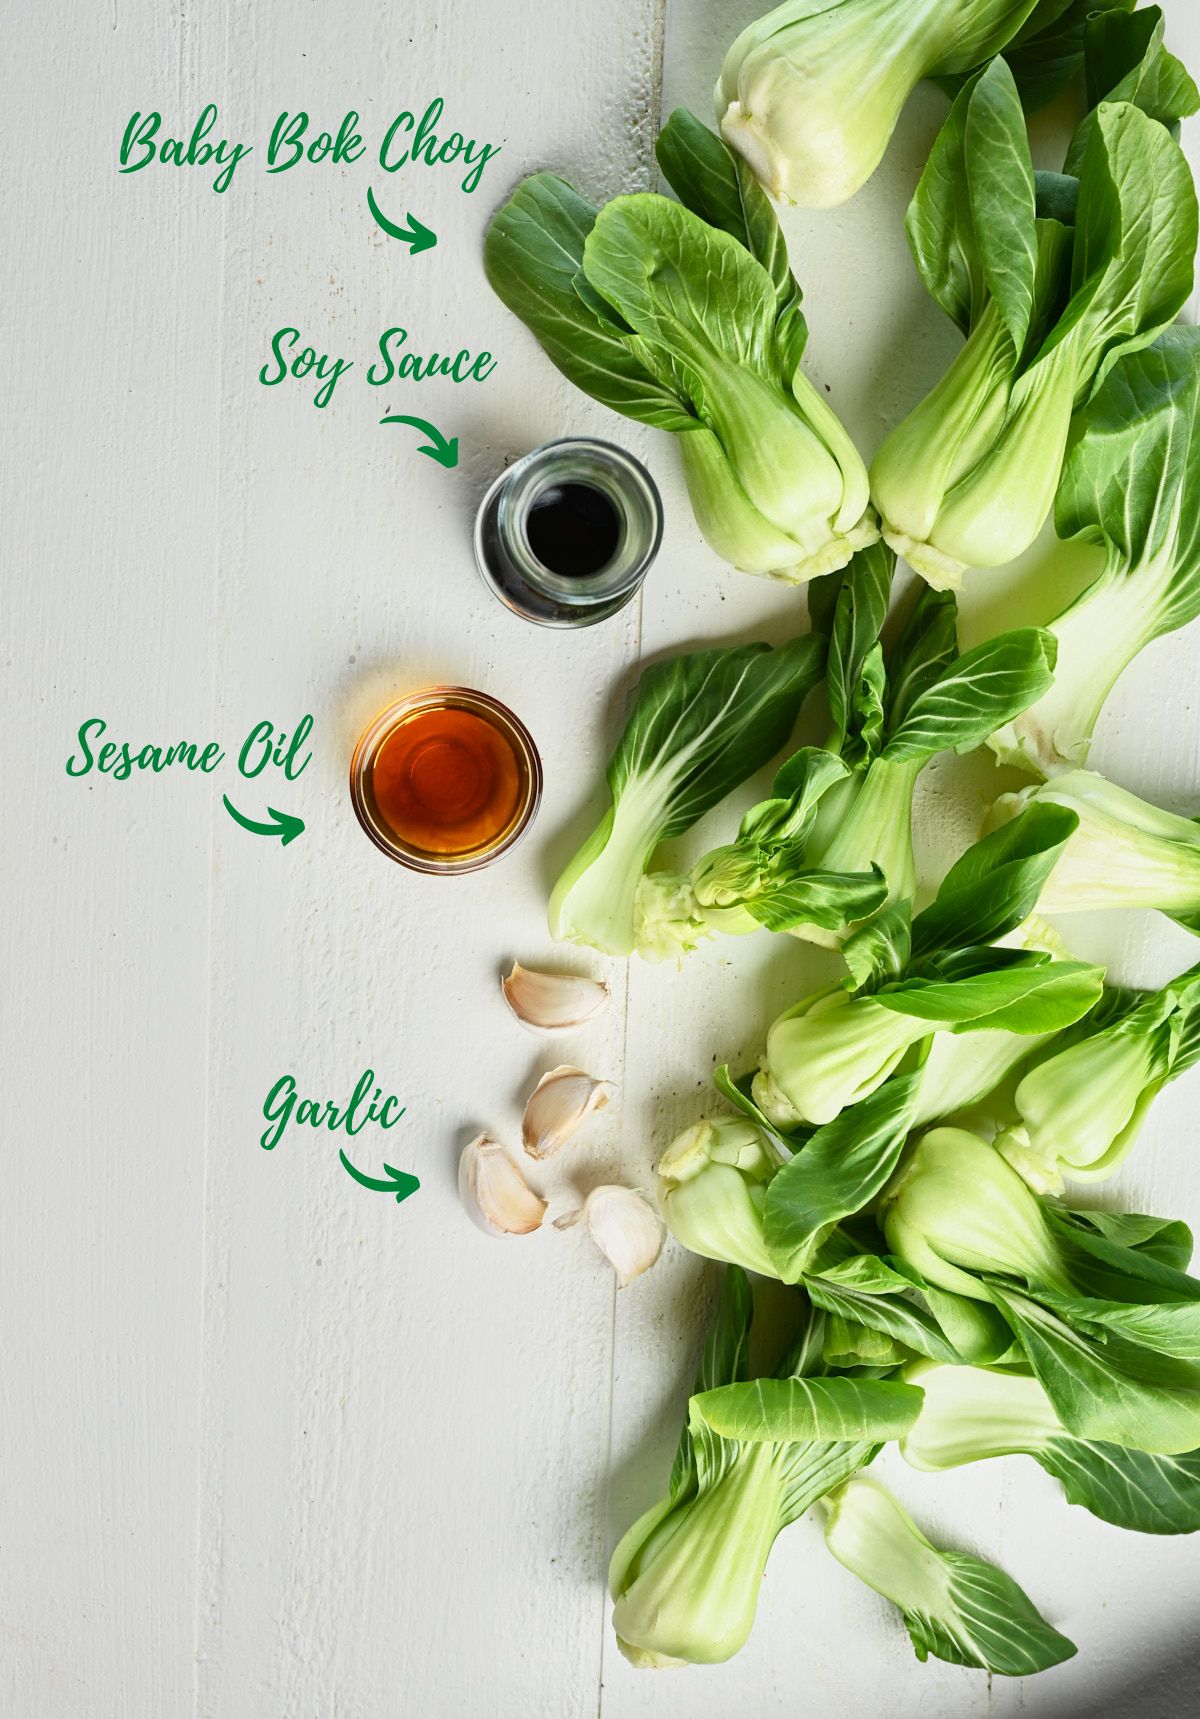 photo of Baby bok choy, soy sauce, sesame oil and garlic laid out on a white table